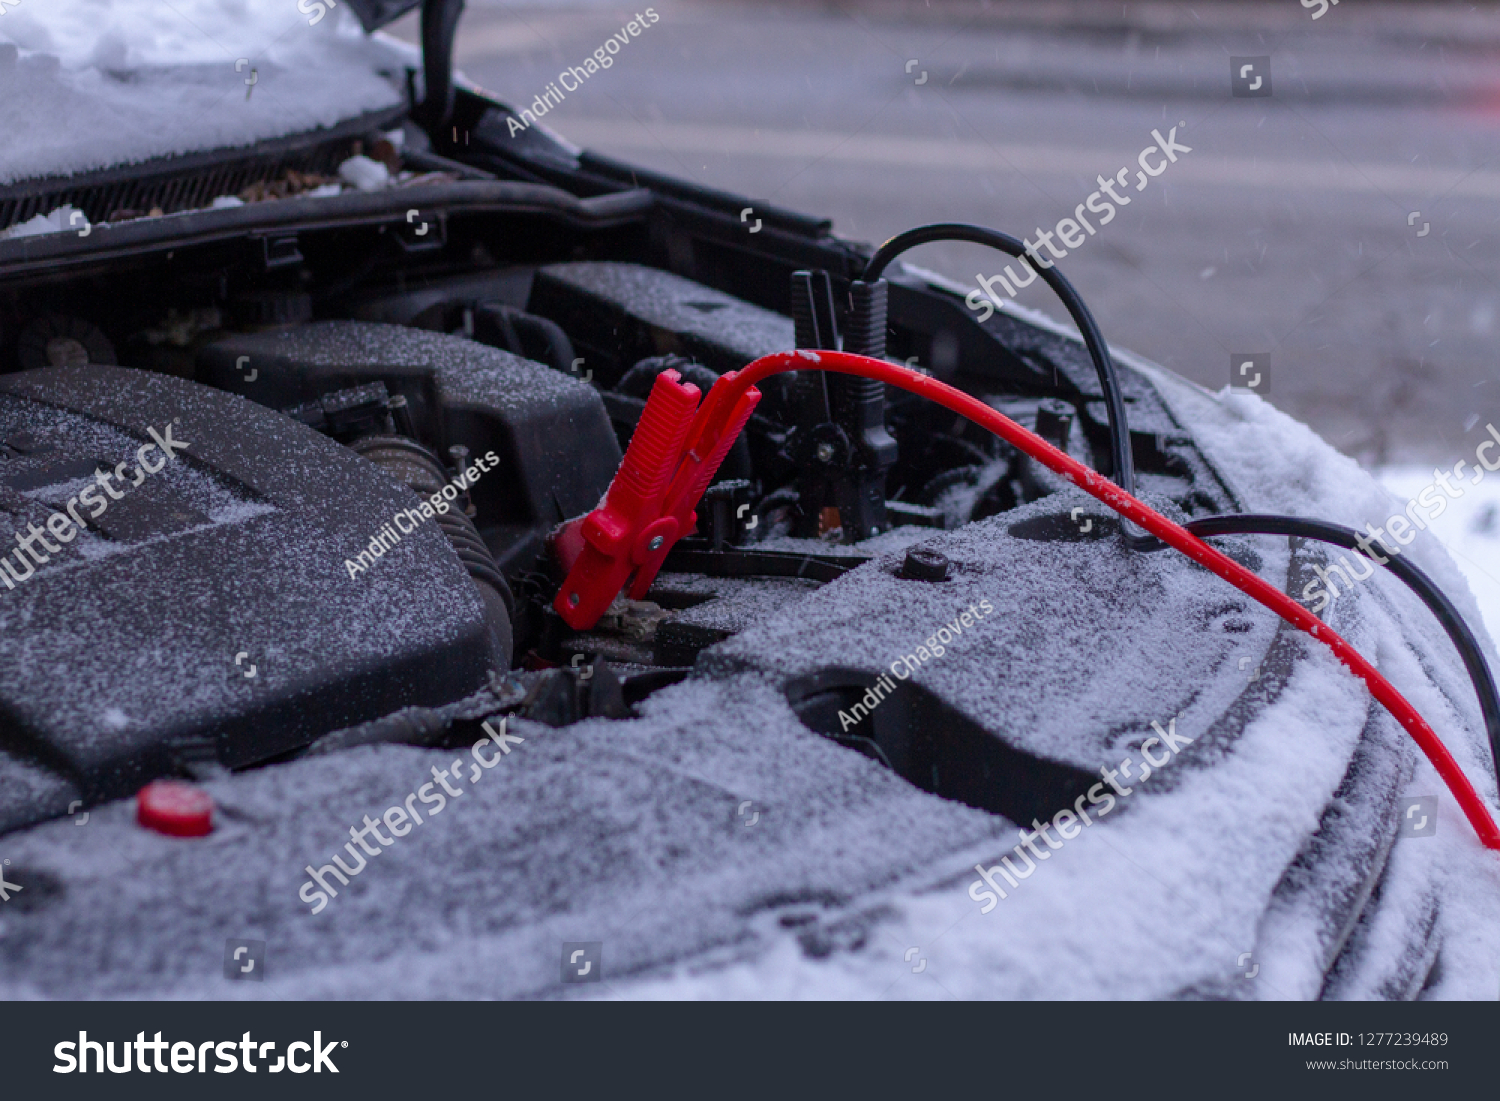 Quickly charge the car battery with jumper cables and another car. Open car hood with battery wires in snowy weather. Jump-Starting the Dead Battery. #1277239489